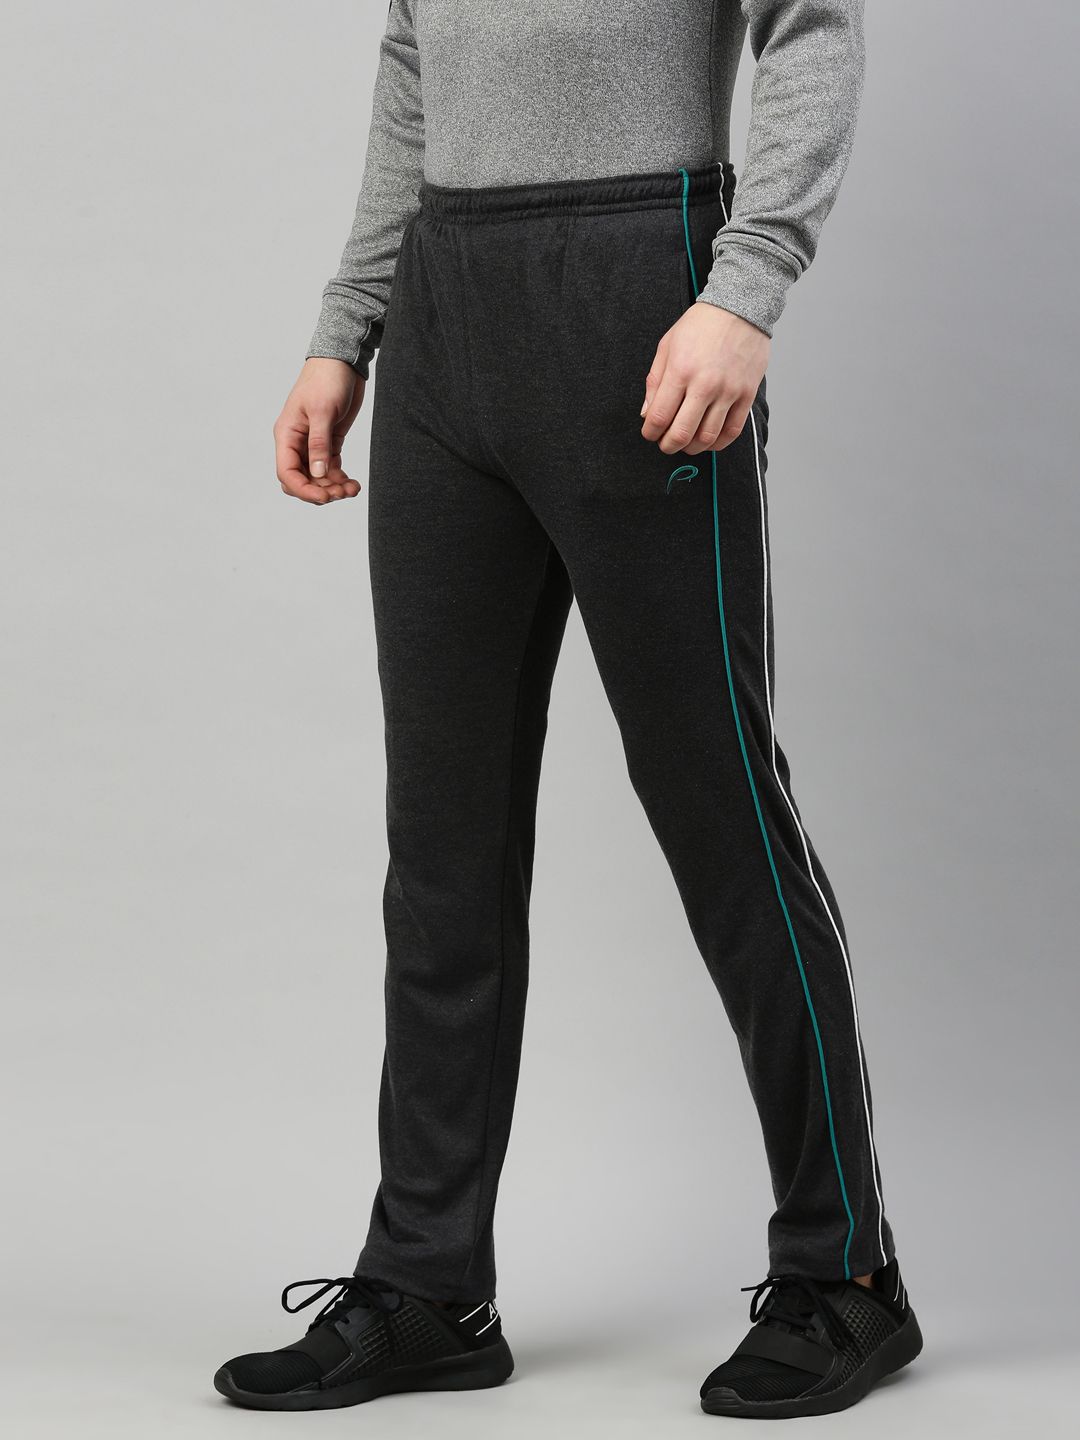 Proline L Size Track Pant in Visakhapatnam - Dealers, Manufacturers &  Suppliers - Justdial